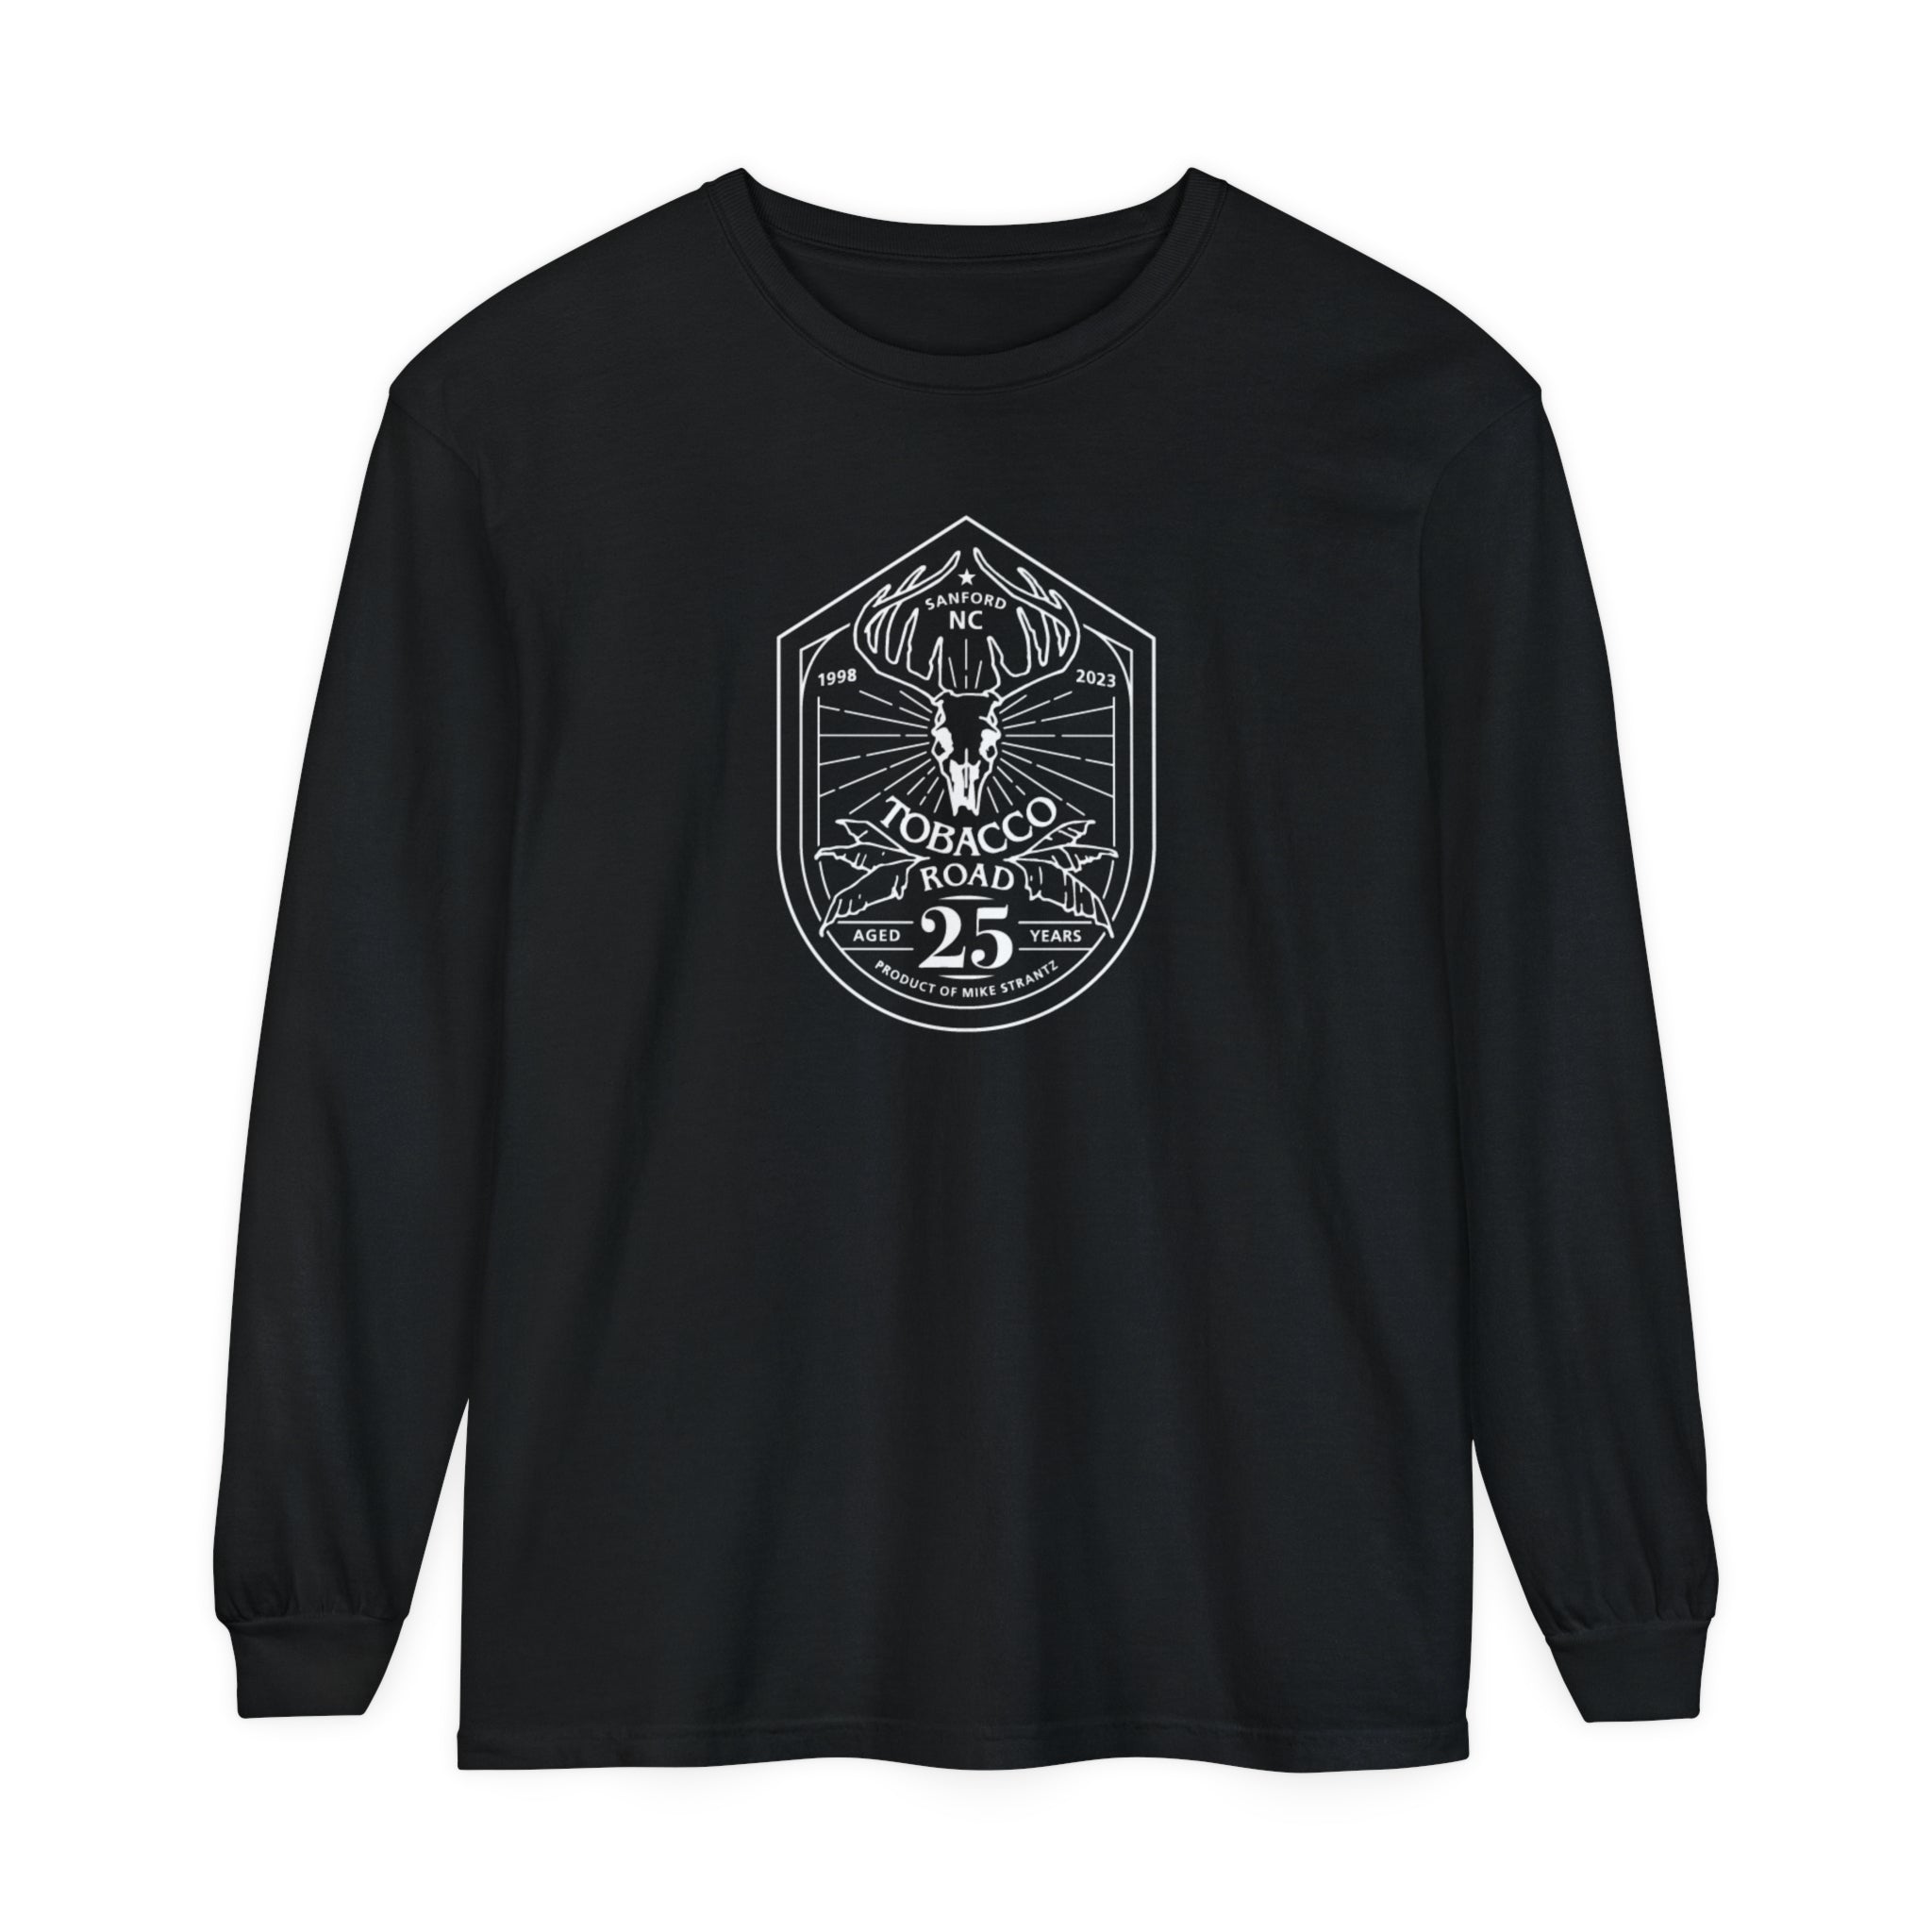 Limited Edition 25th Anniversary Long Sleeve T-Shirt